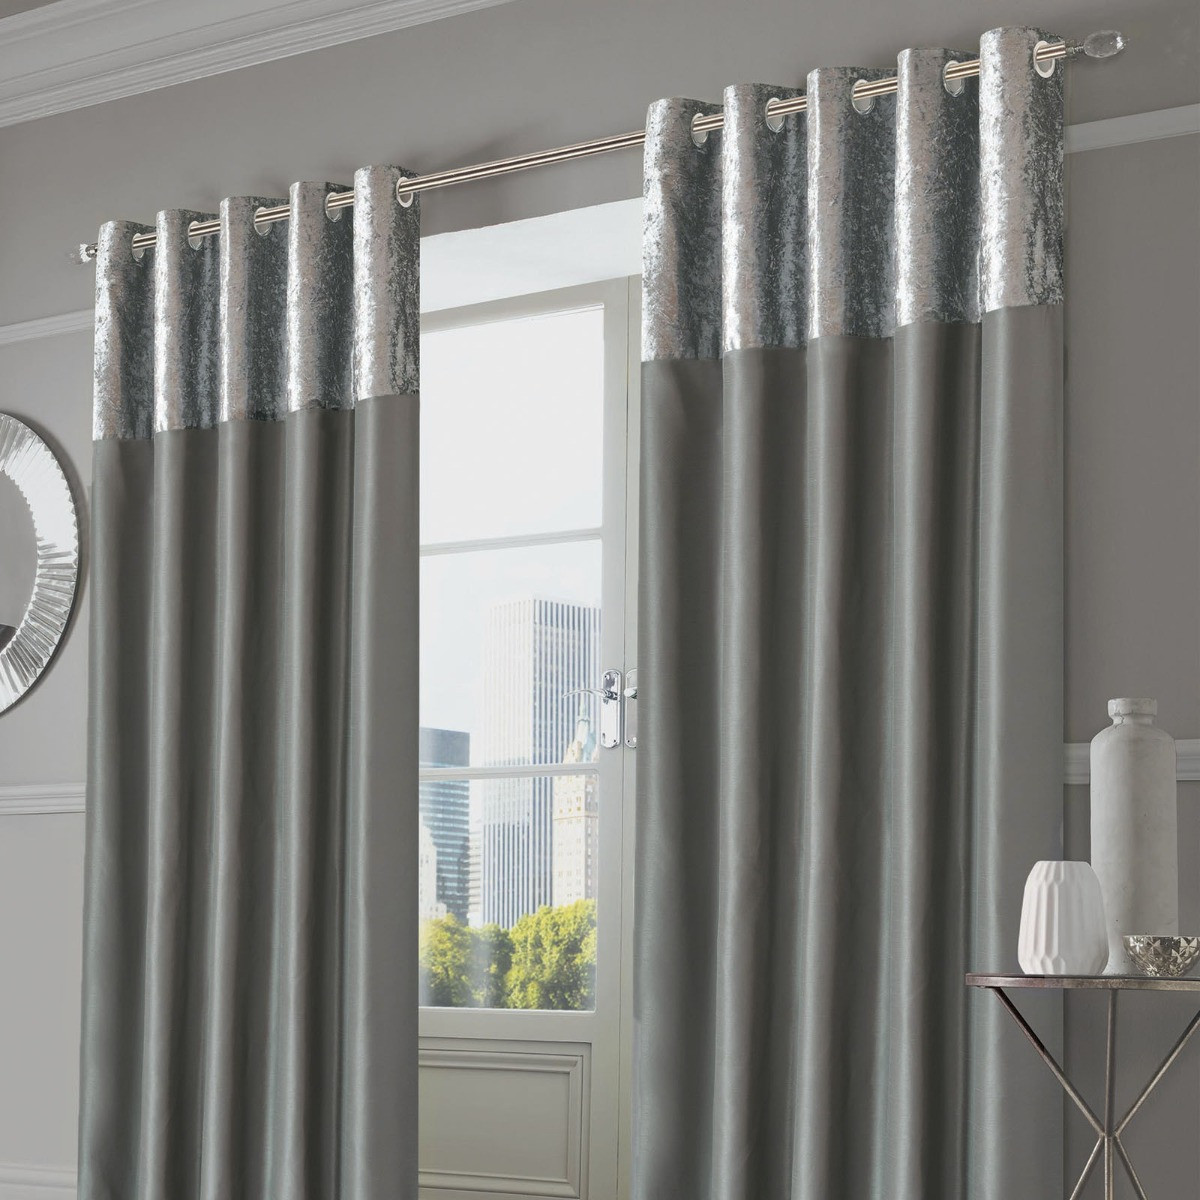 Sienna Home Crushed Velvet Band Eyelet Curtains, Silver Grey - 90"x54">